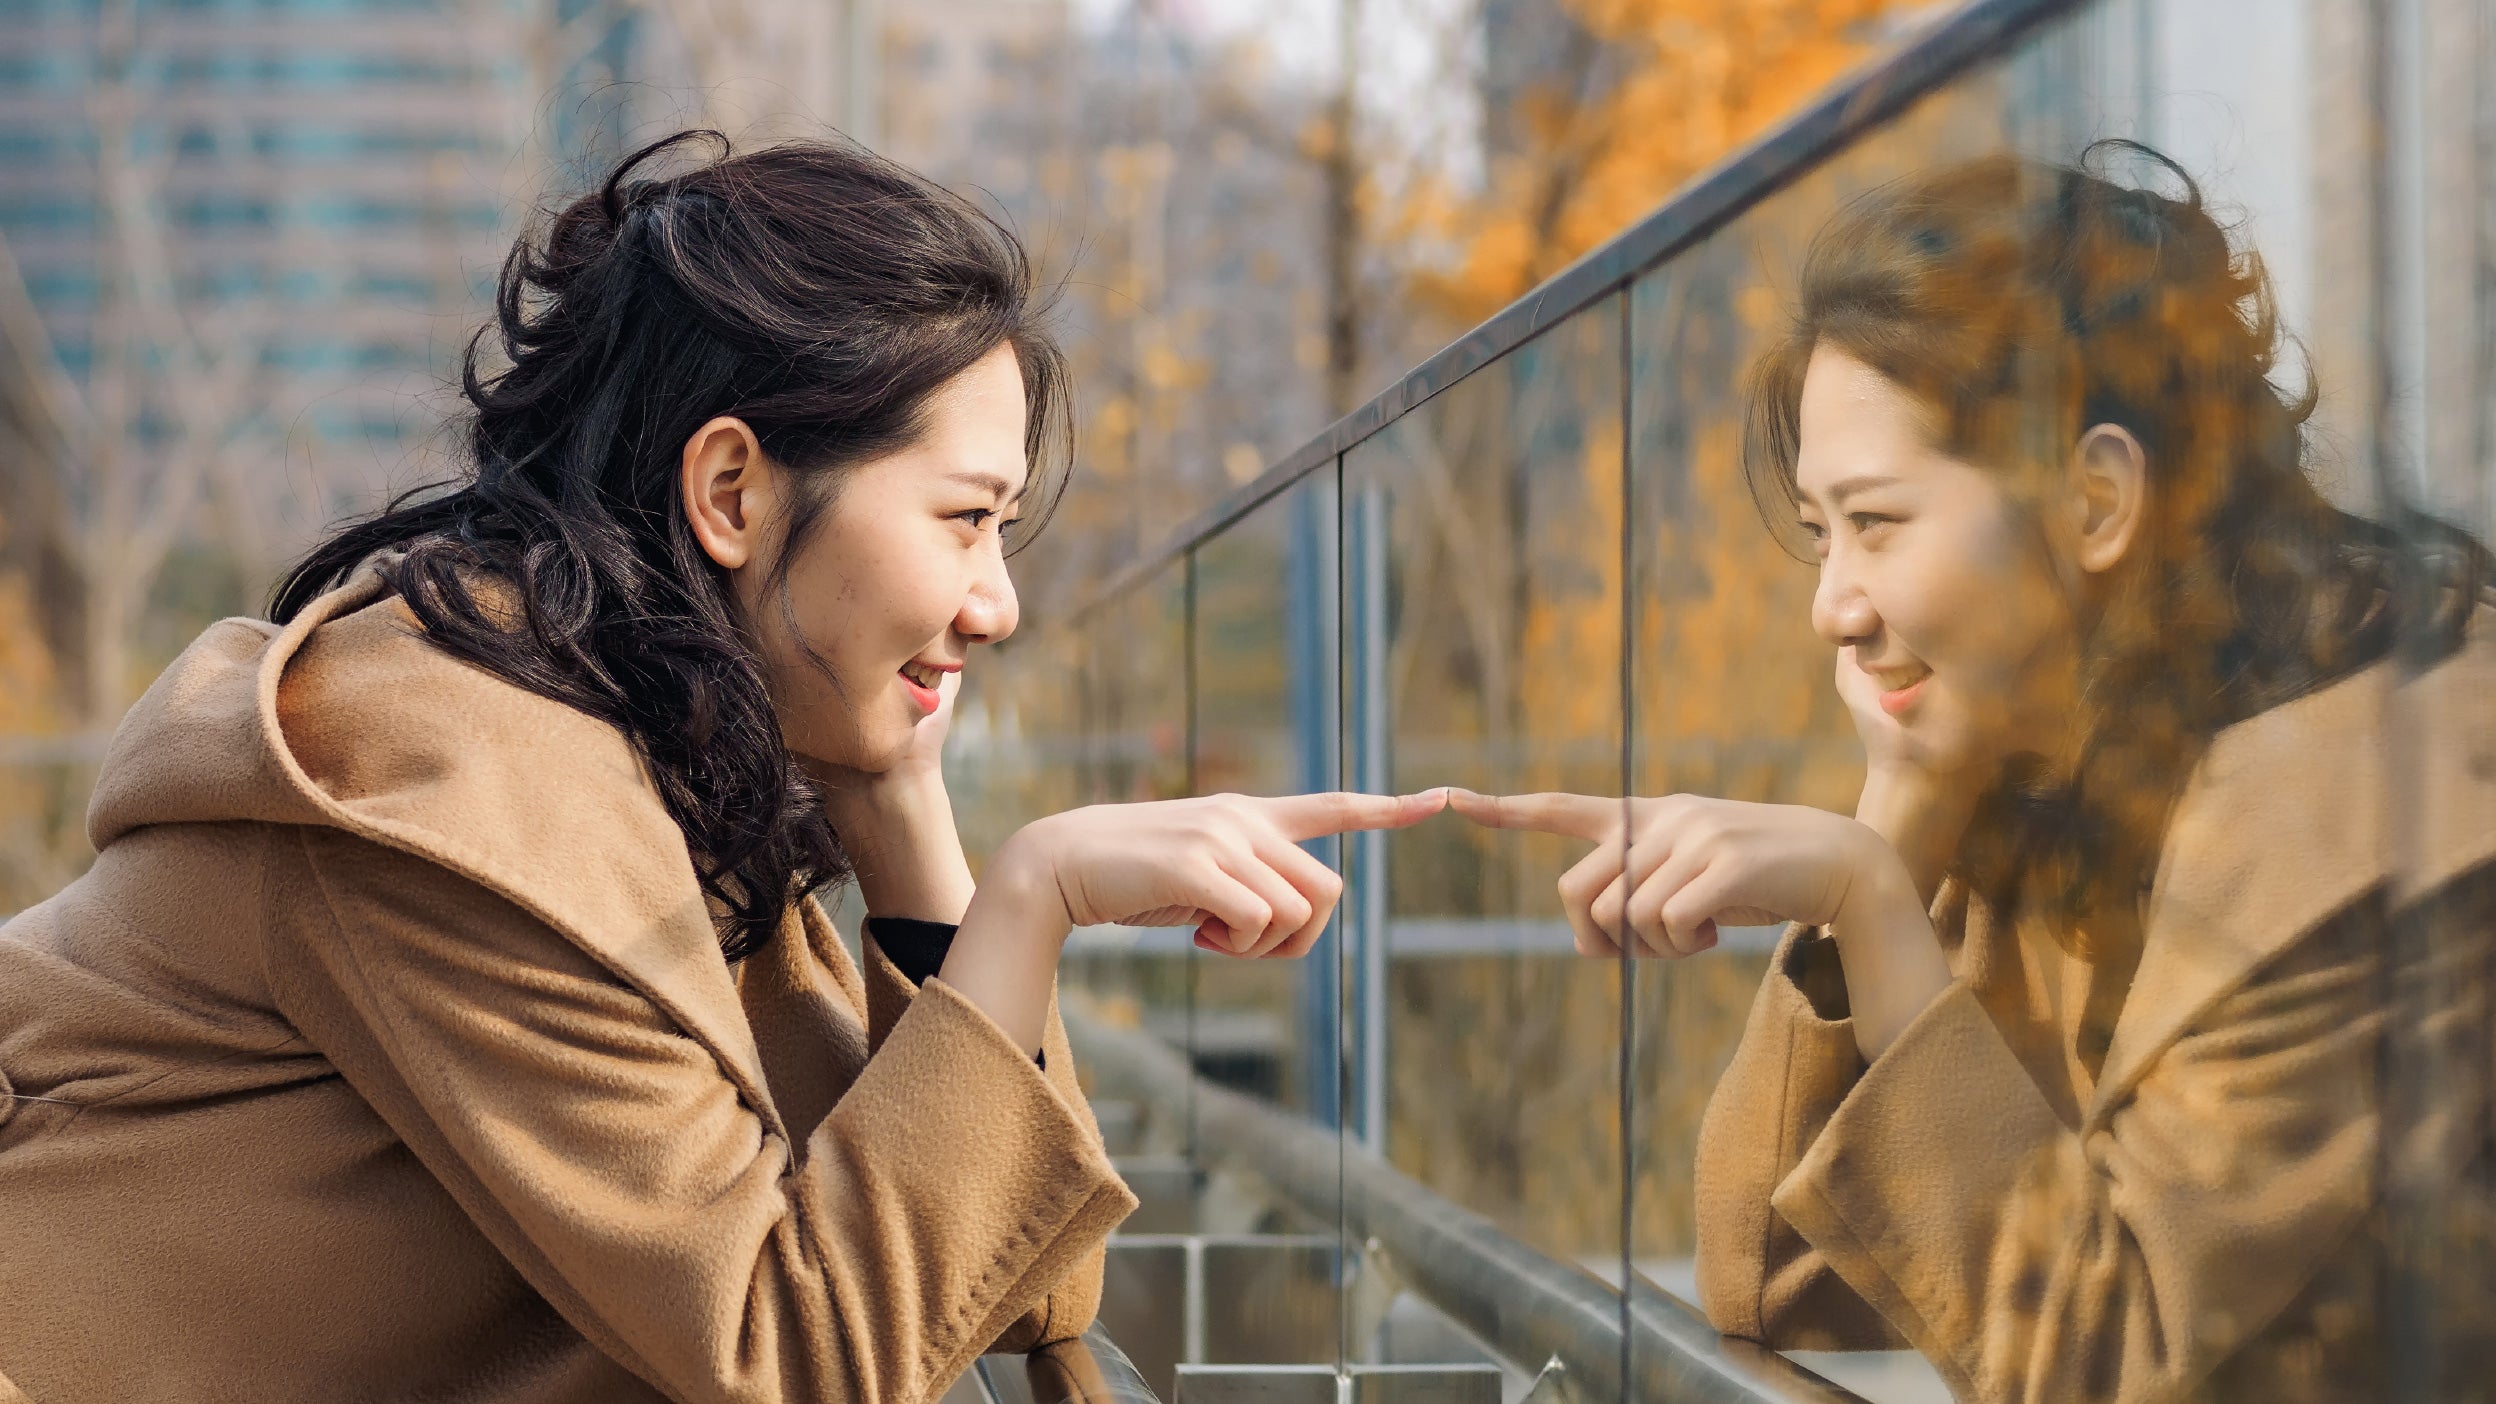 beautiful chinese girl looking at her mirror image in glass.